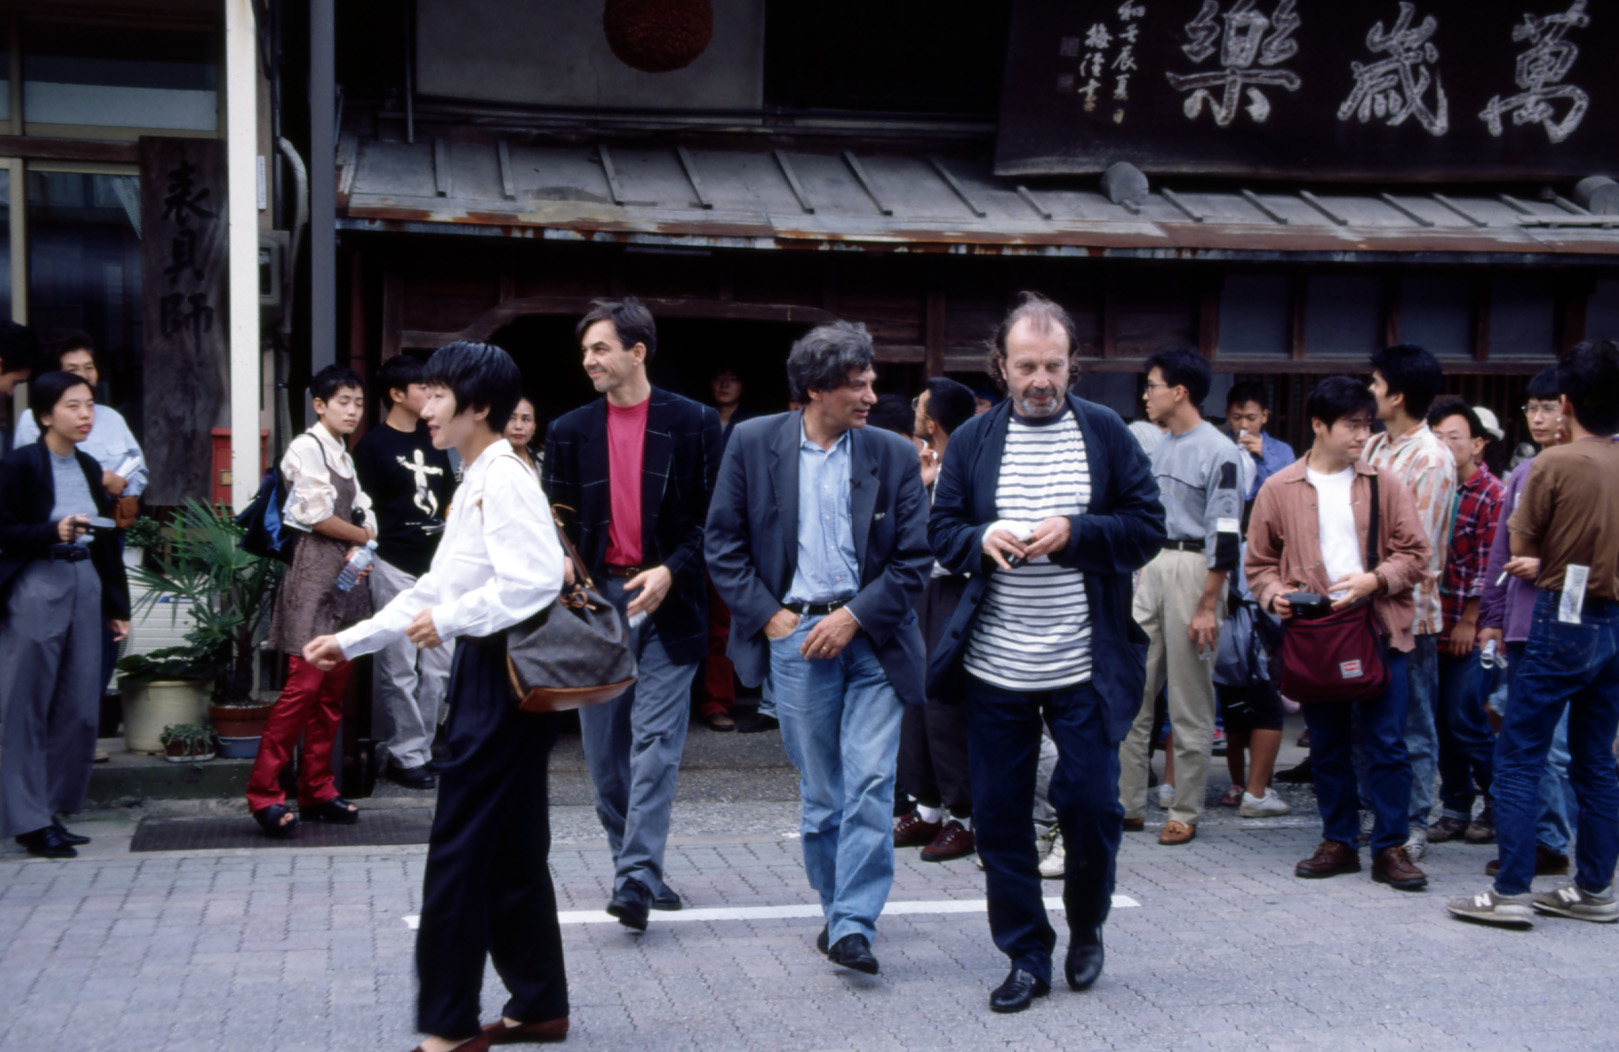 Jan Hoet (center), Franz West (right), and West’s assistant during the walking talk for the exhibition “Jan Hoet in Tsurugi,” in front of the main store of Manzairaku, sake brewery, Hakusan, Ishikawa, September 25, 1994.